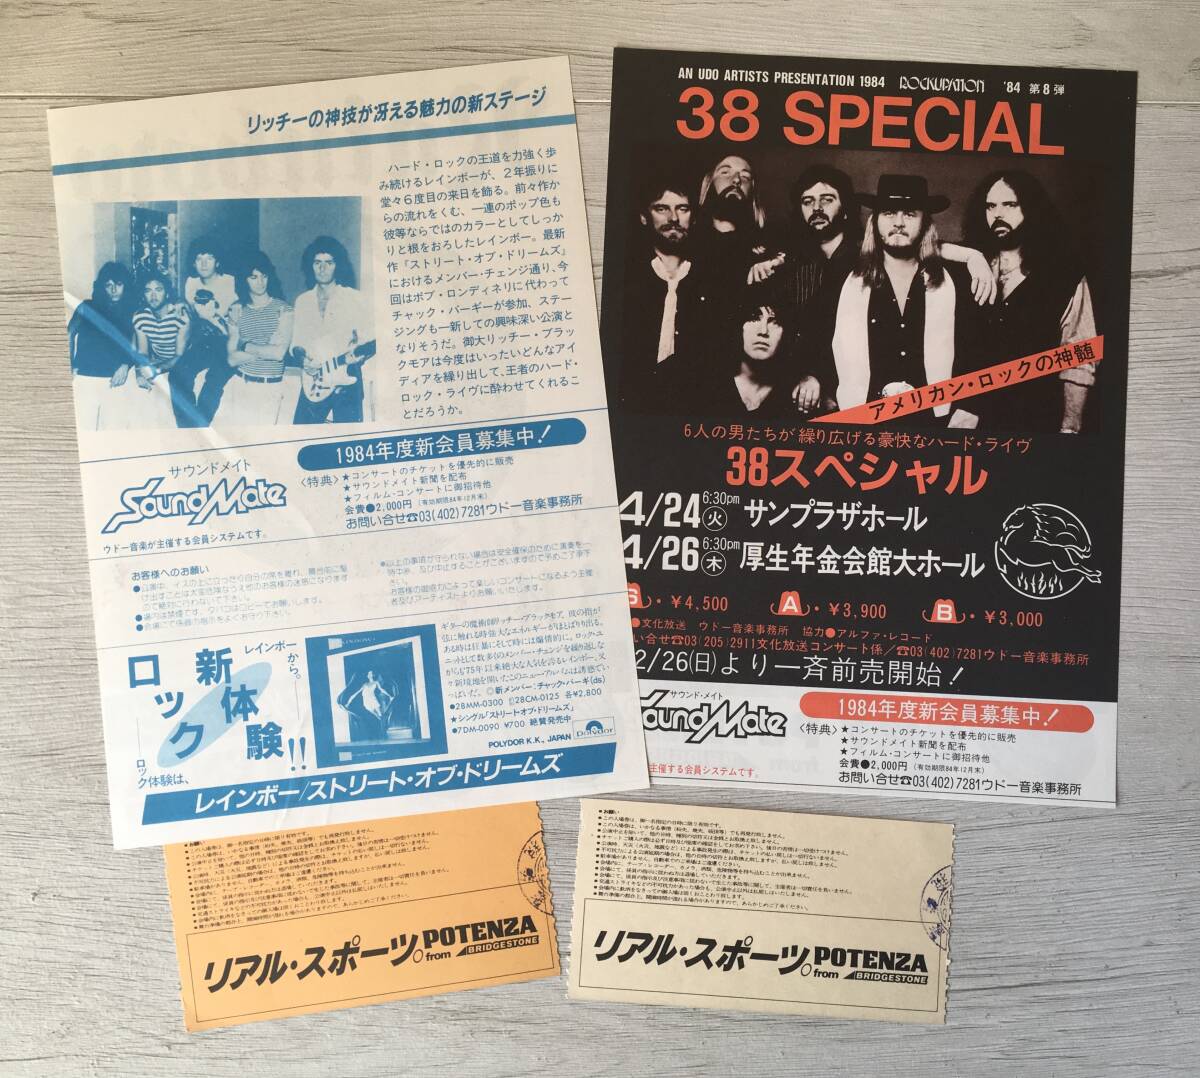  ticket 2 sheets attaching RAINBOW 1984 concert pamphlet Flyer 2 kind 